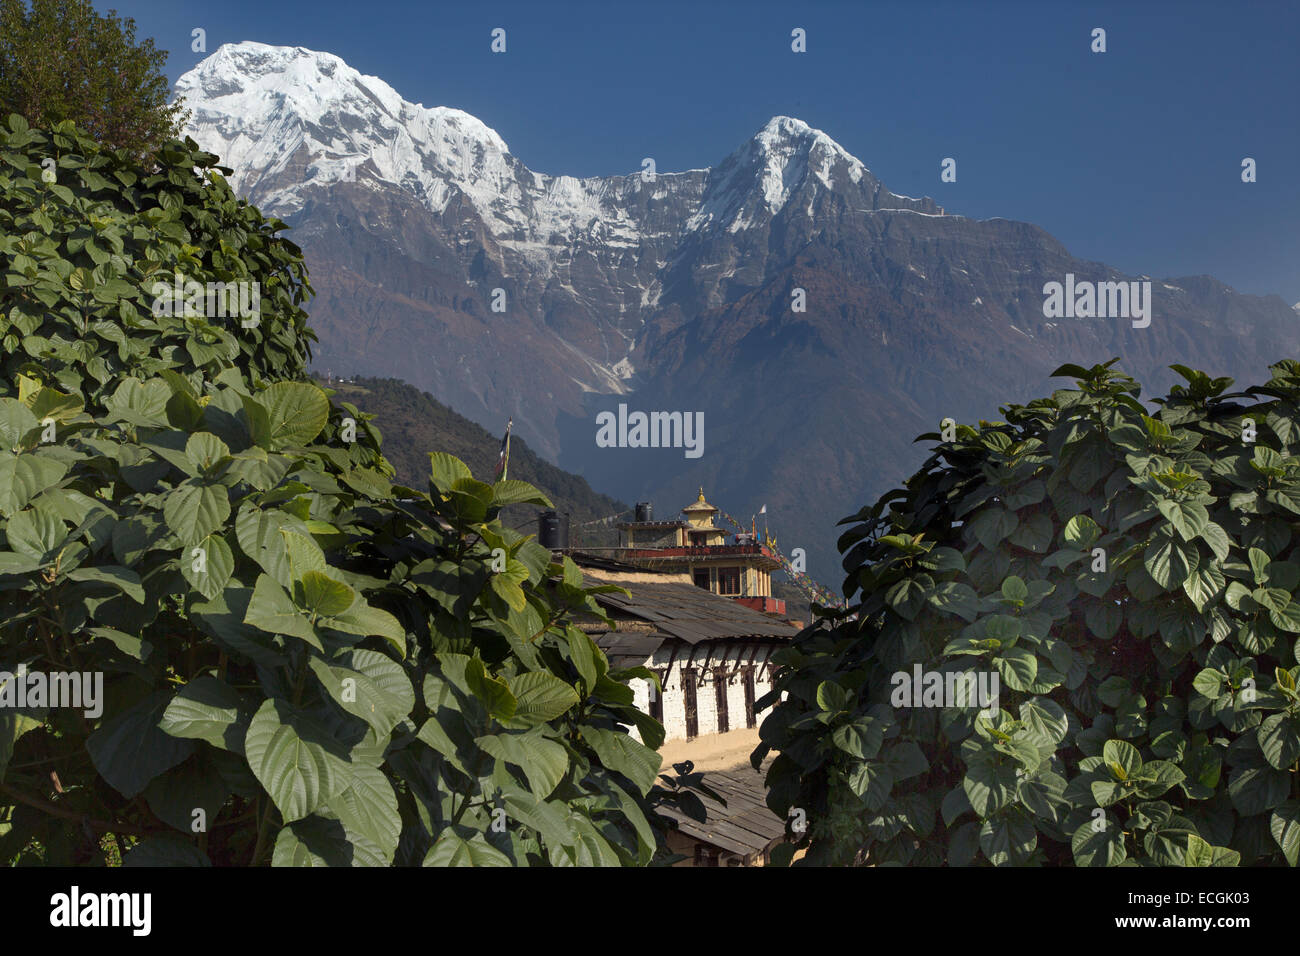 The Mountain Annapurna and Machhapuchchhre or Fishtail Mountain  from the village of Ghandruk in the Modi Khola Valley Stock Photo